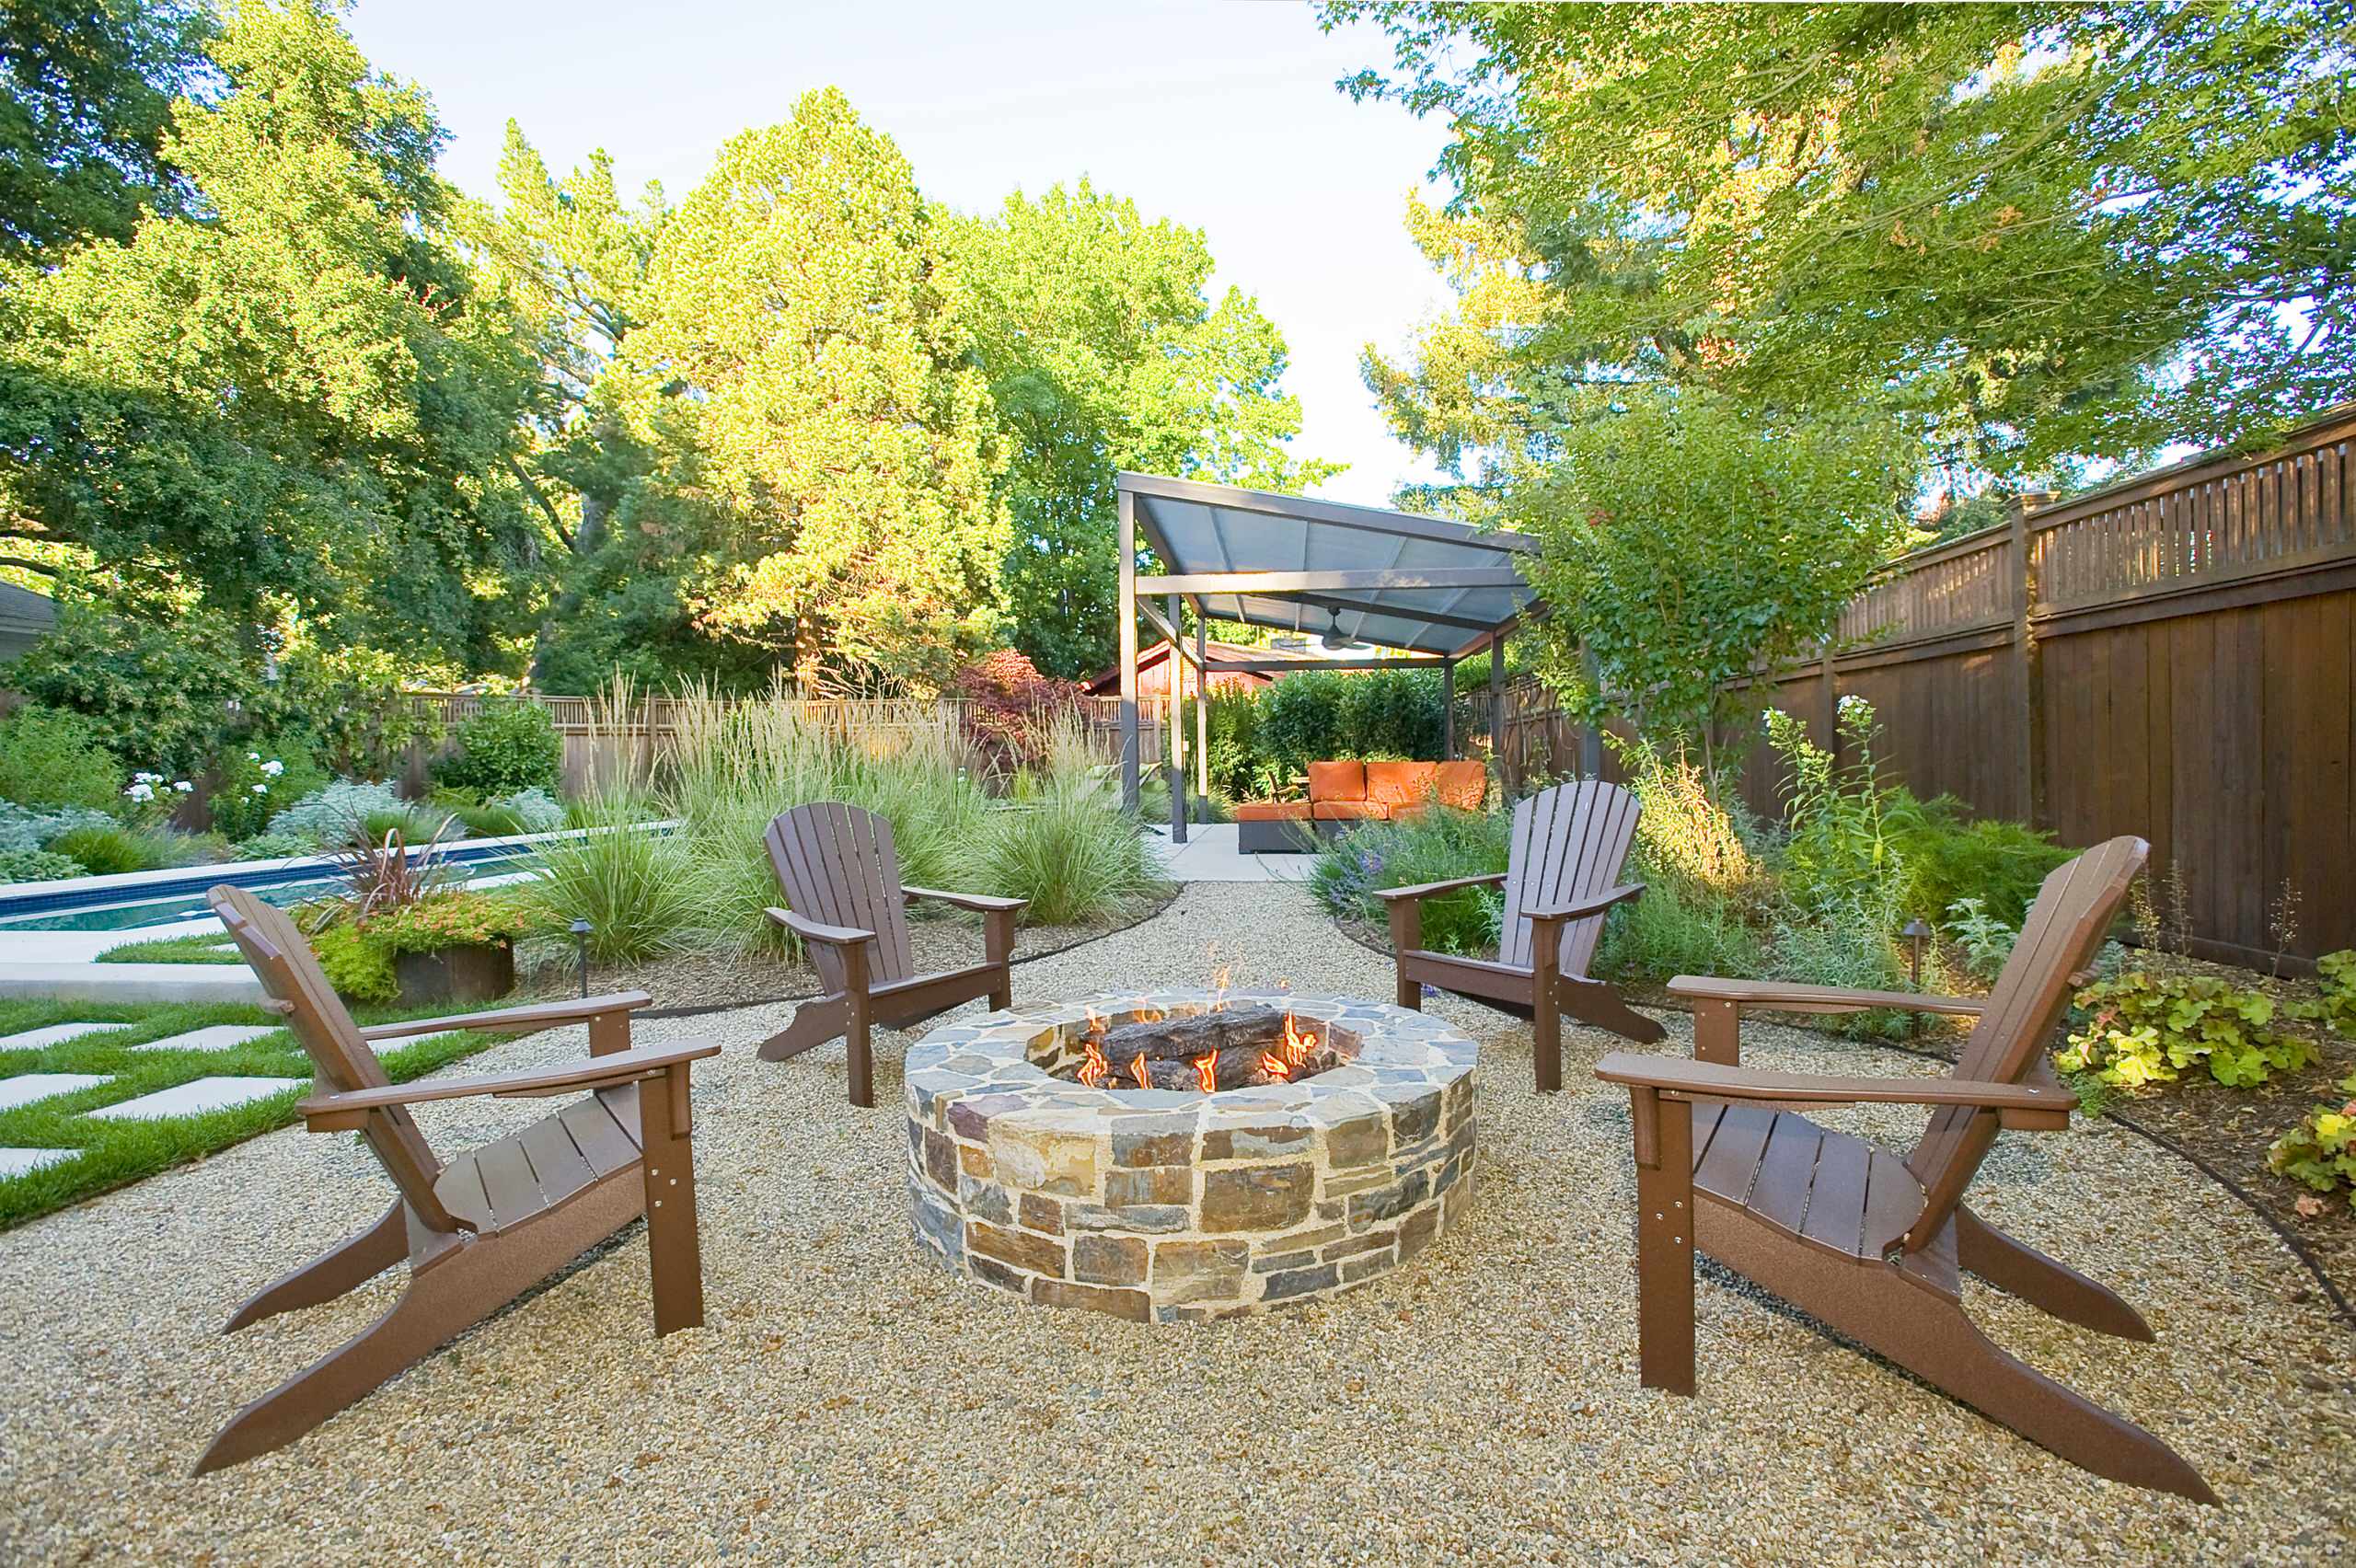 Pea Gravel Fire Pit Houzz, Fire Pit Area With Pea Gravel